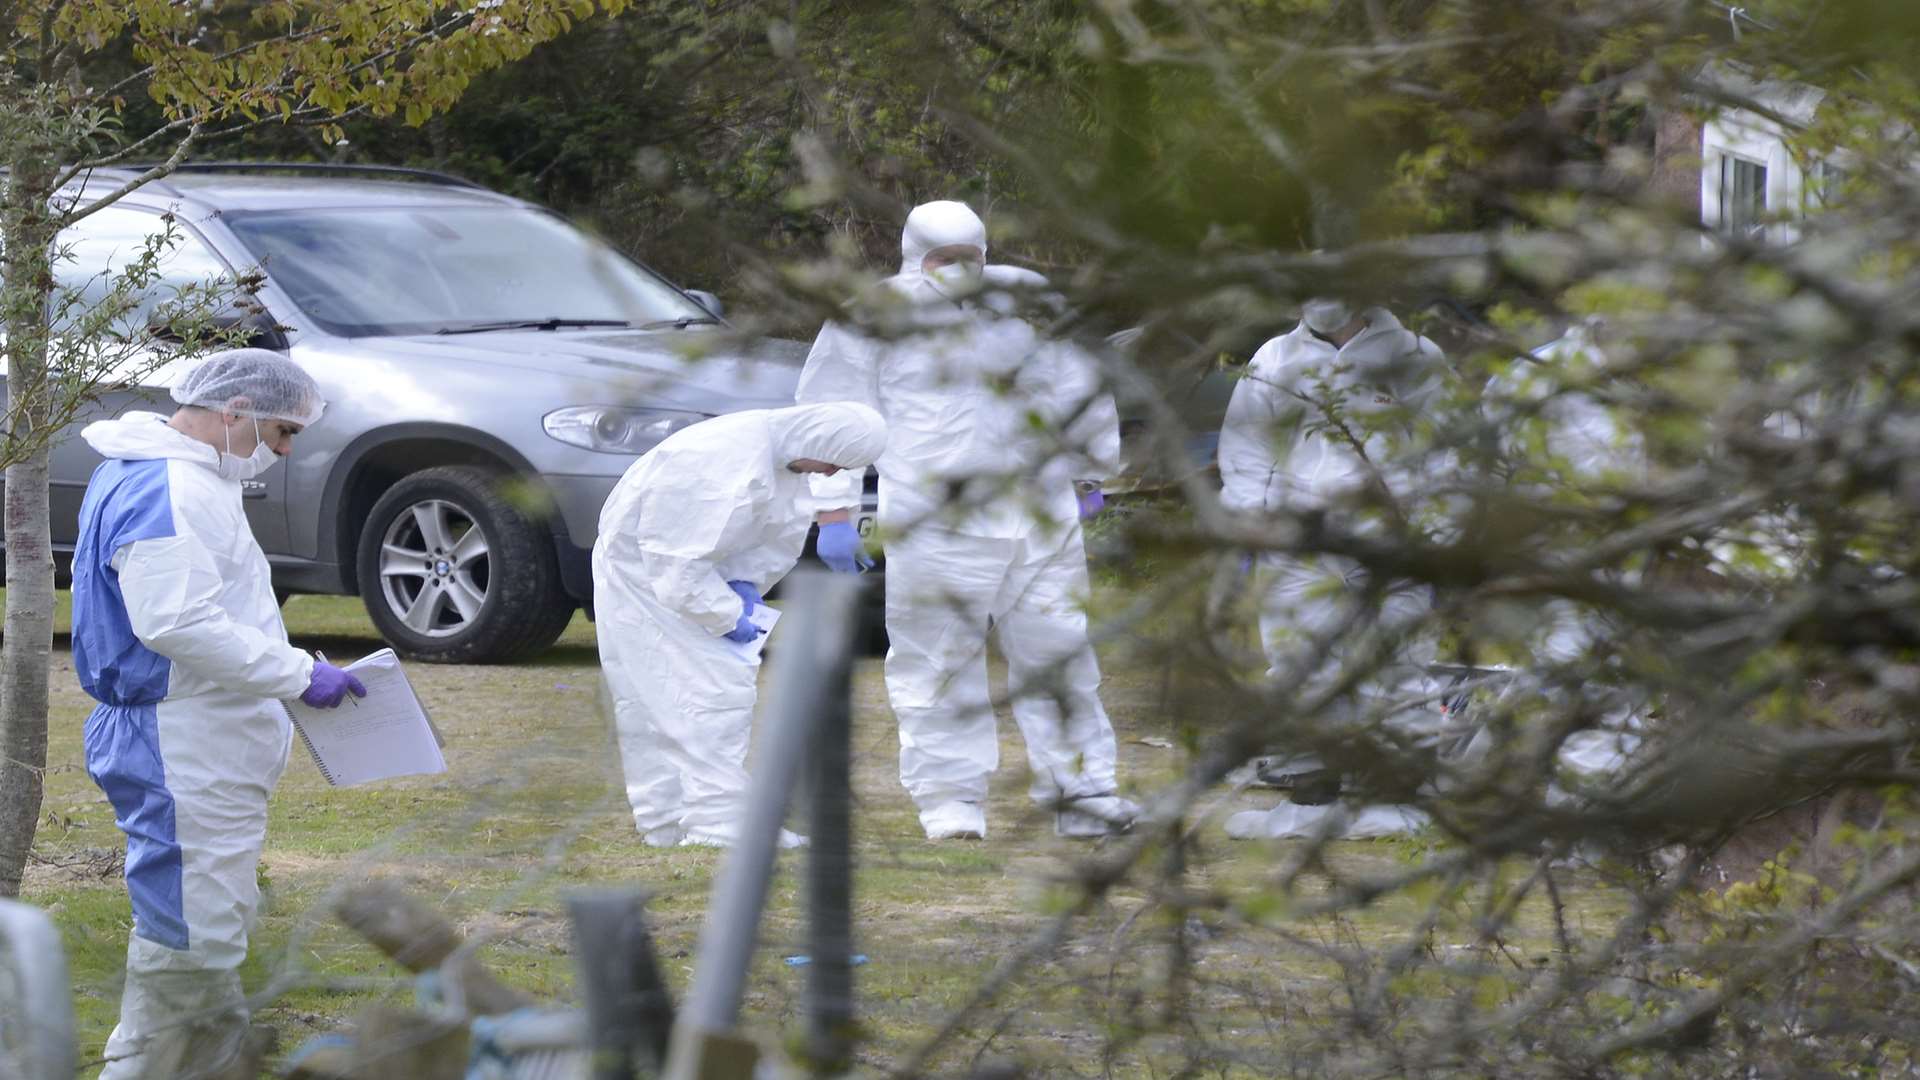 Forensic officers at the scene of the fatal shooting in Goudhurst